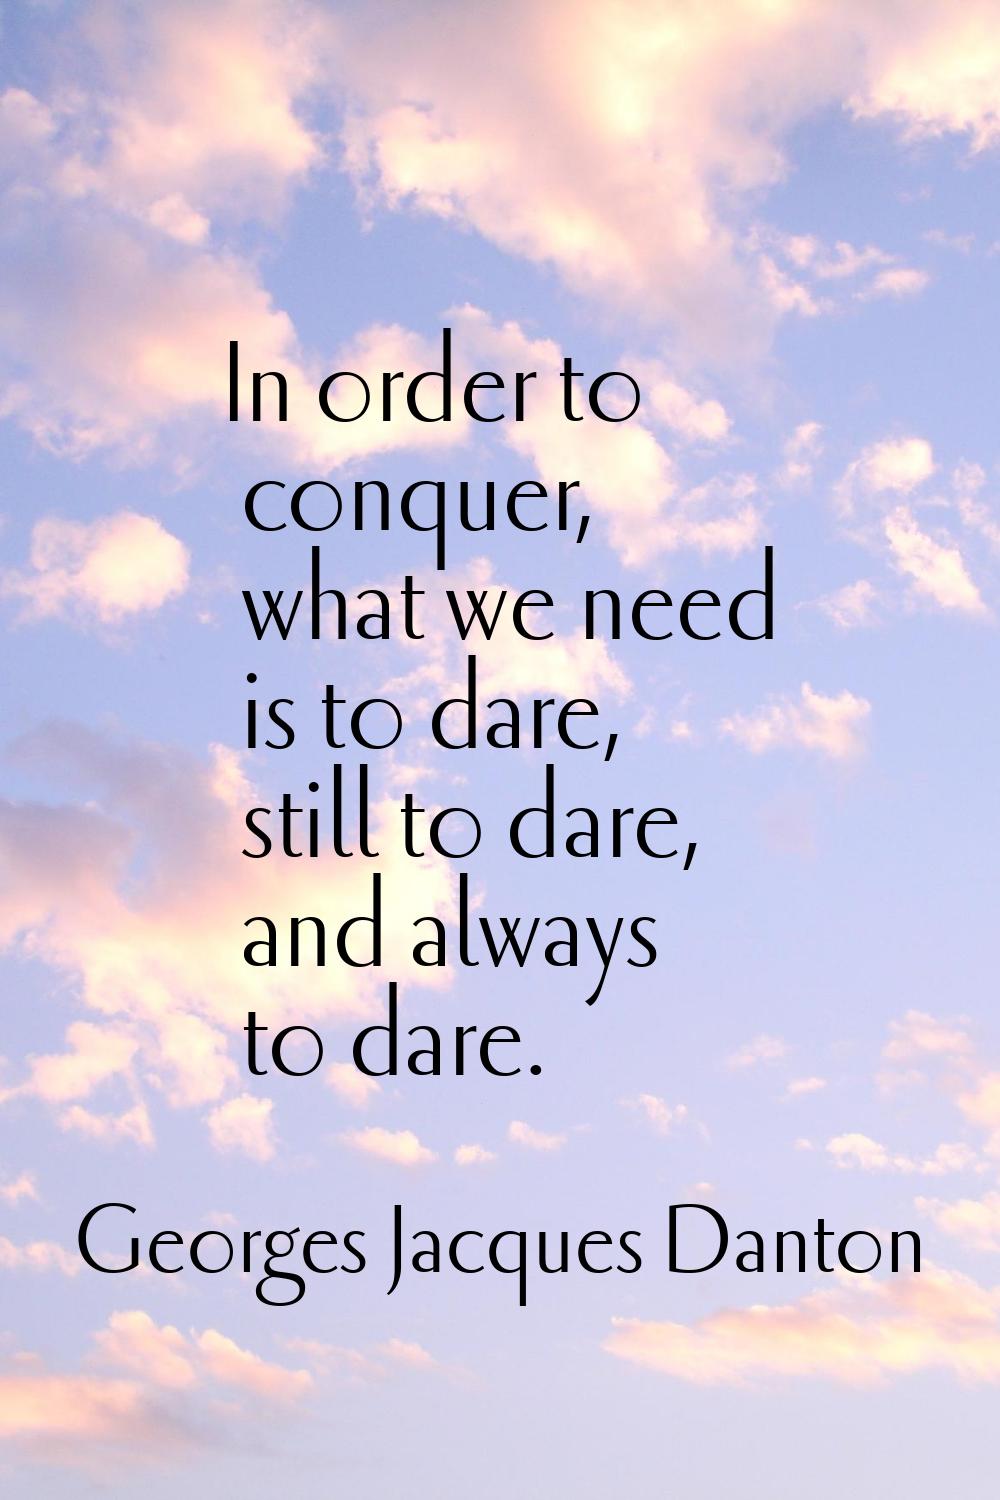 In order to conquer, what we need is to dare, still to dare, and always to dare.